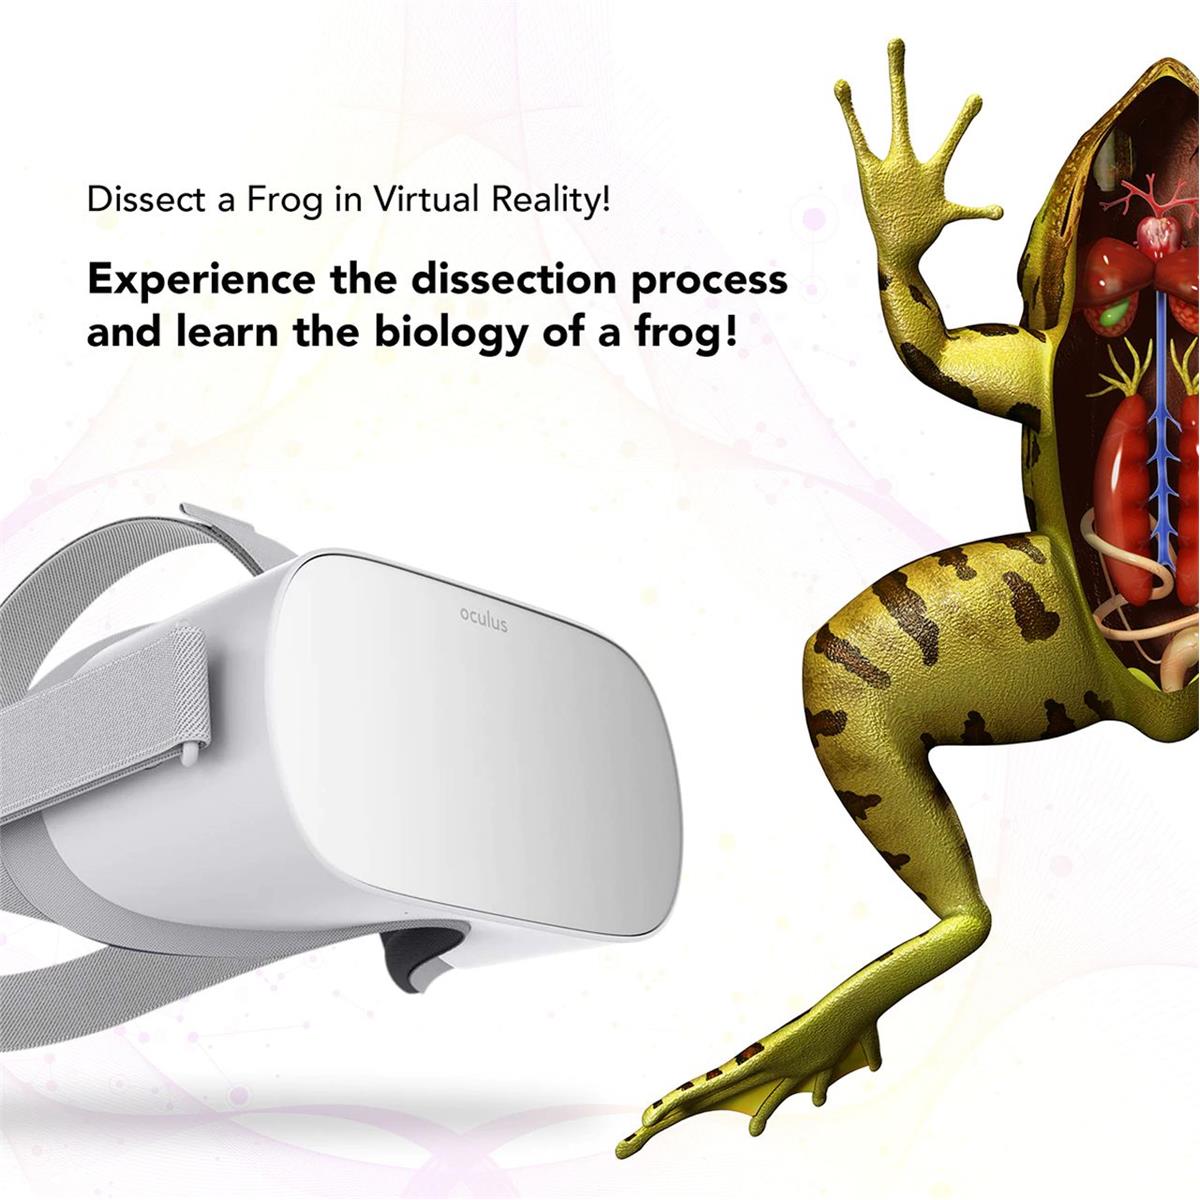 Image of Hamilton Buhl VR-FRG Oculus Go VR Frog Dissection Educational Experience License